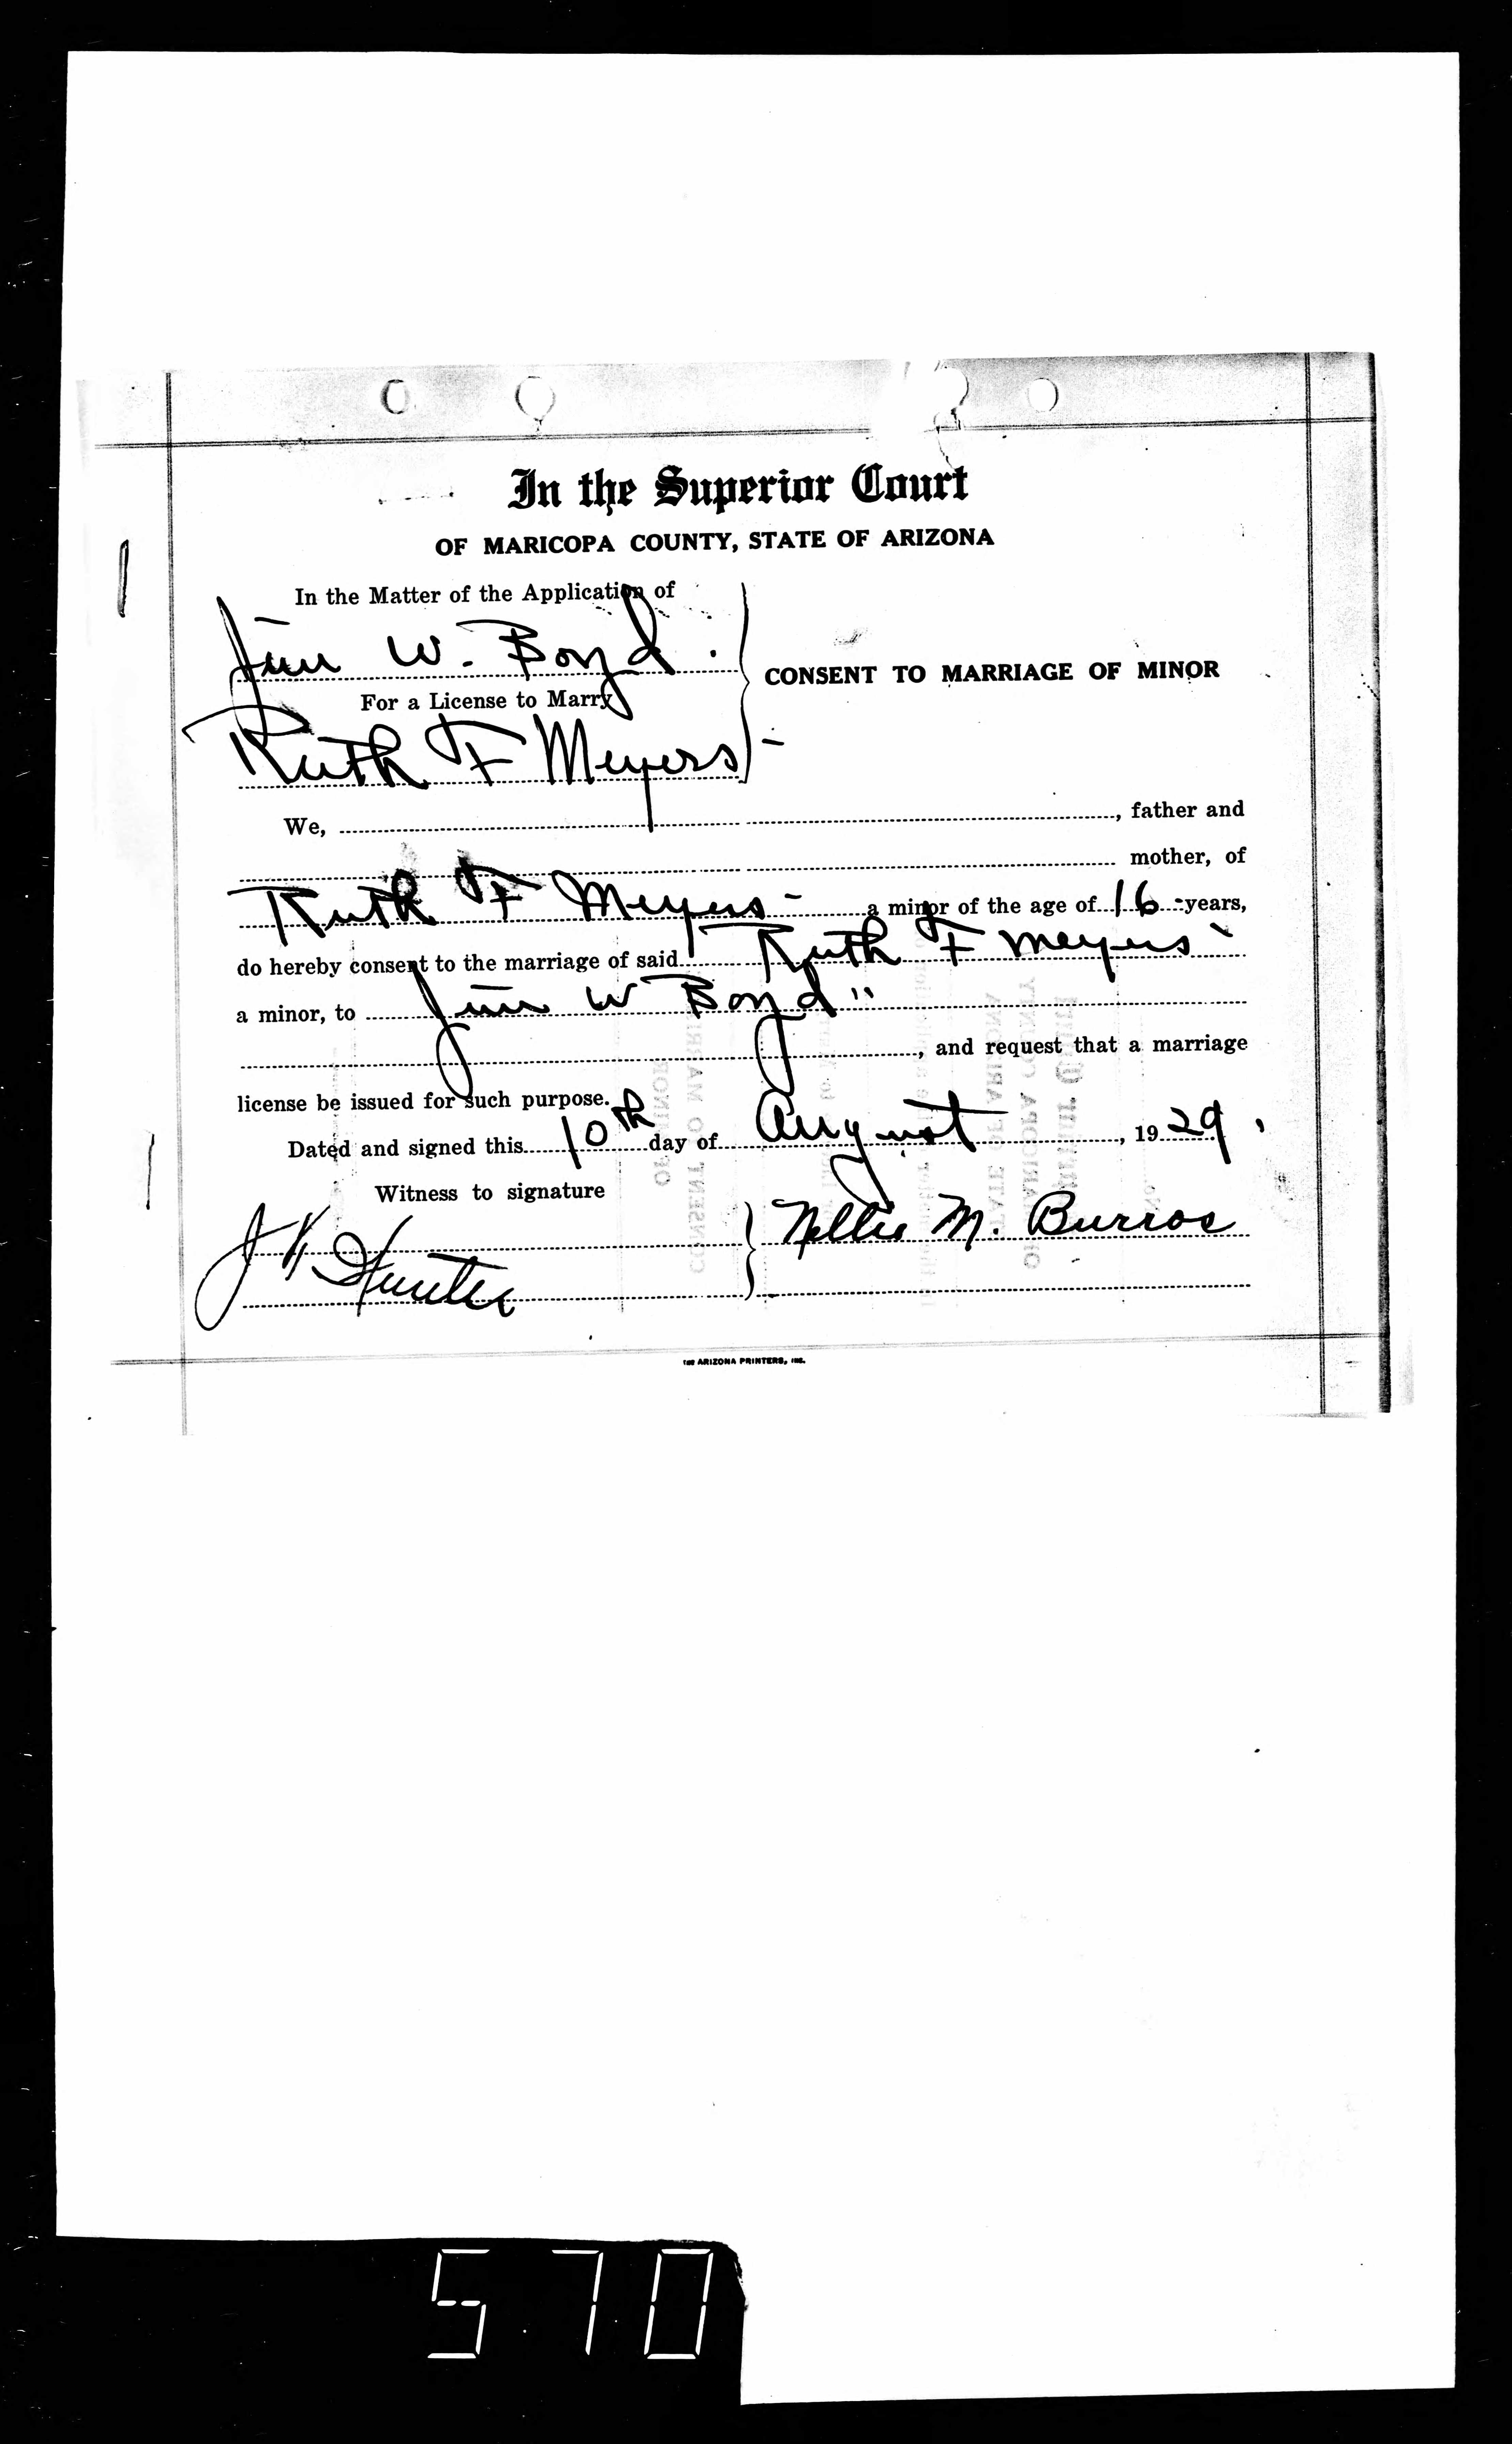 Consent for marriage to minor for Jim W. Boyd to marry Ruth F. Meyers